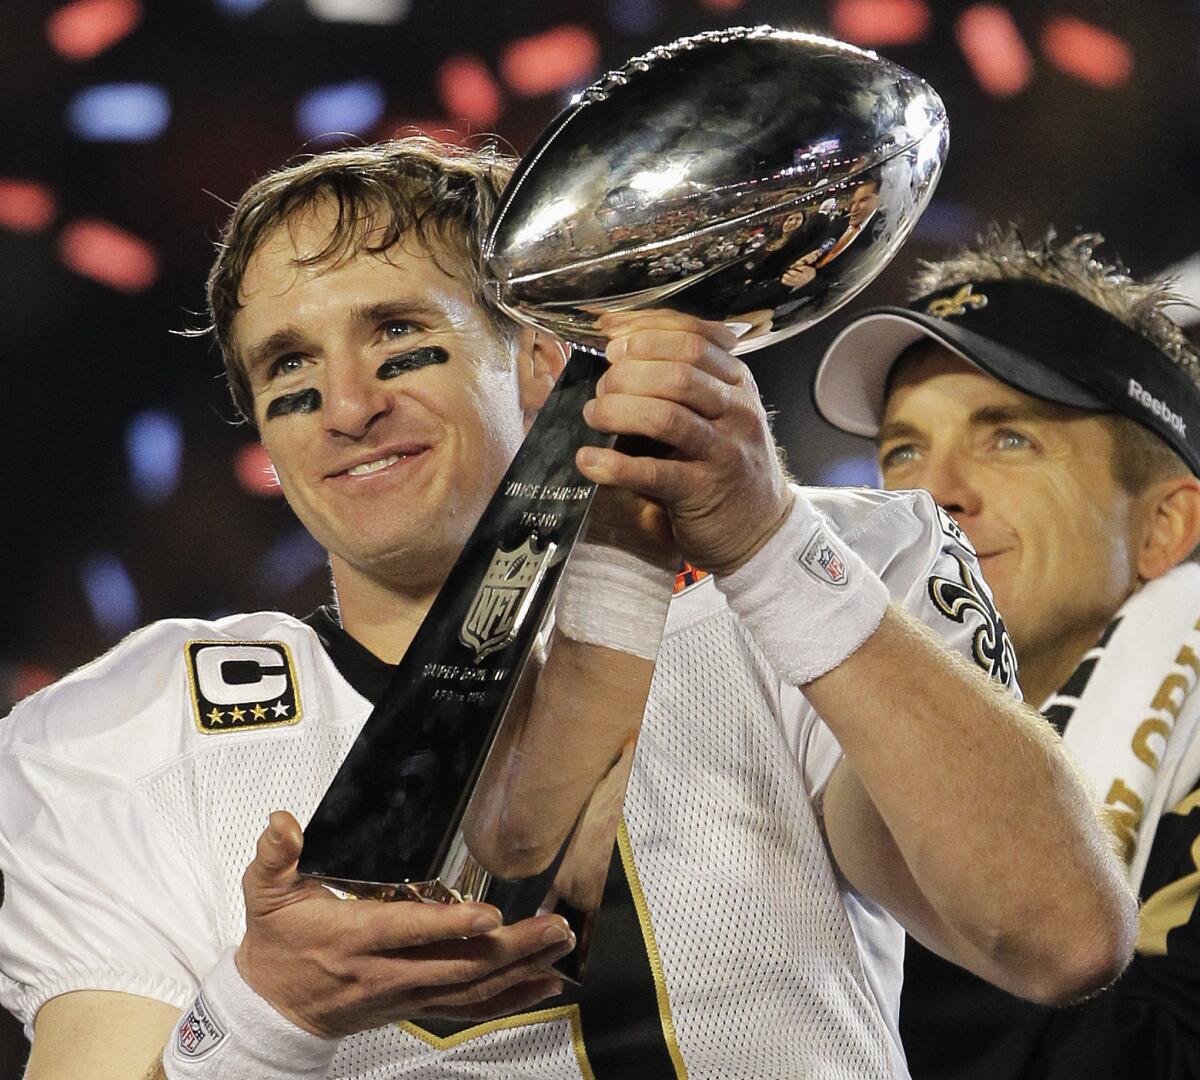 Drew Brees holds the Vince Lombardi Trophy while celebrating the New Orleans Saints' Super Bowl XLIV victory.